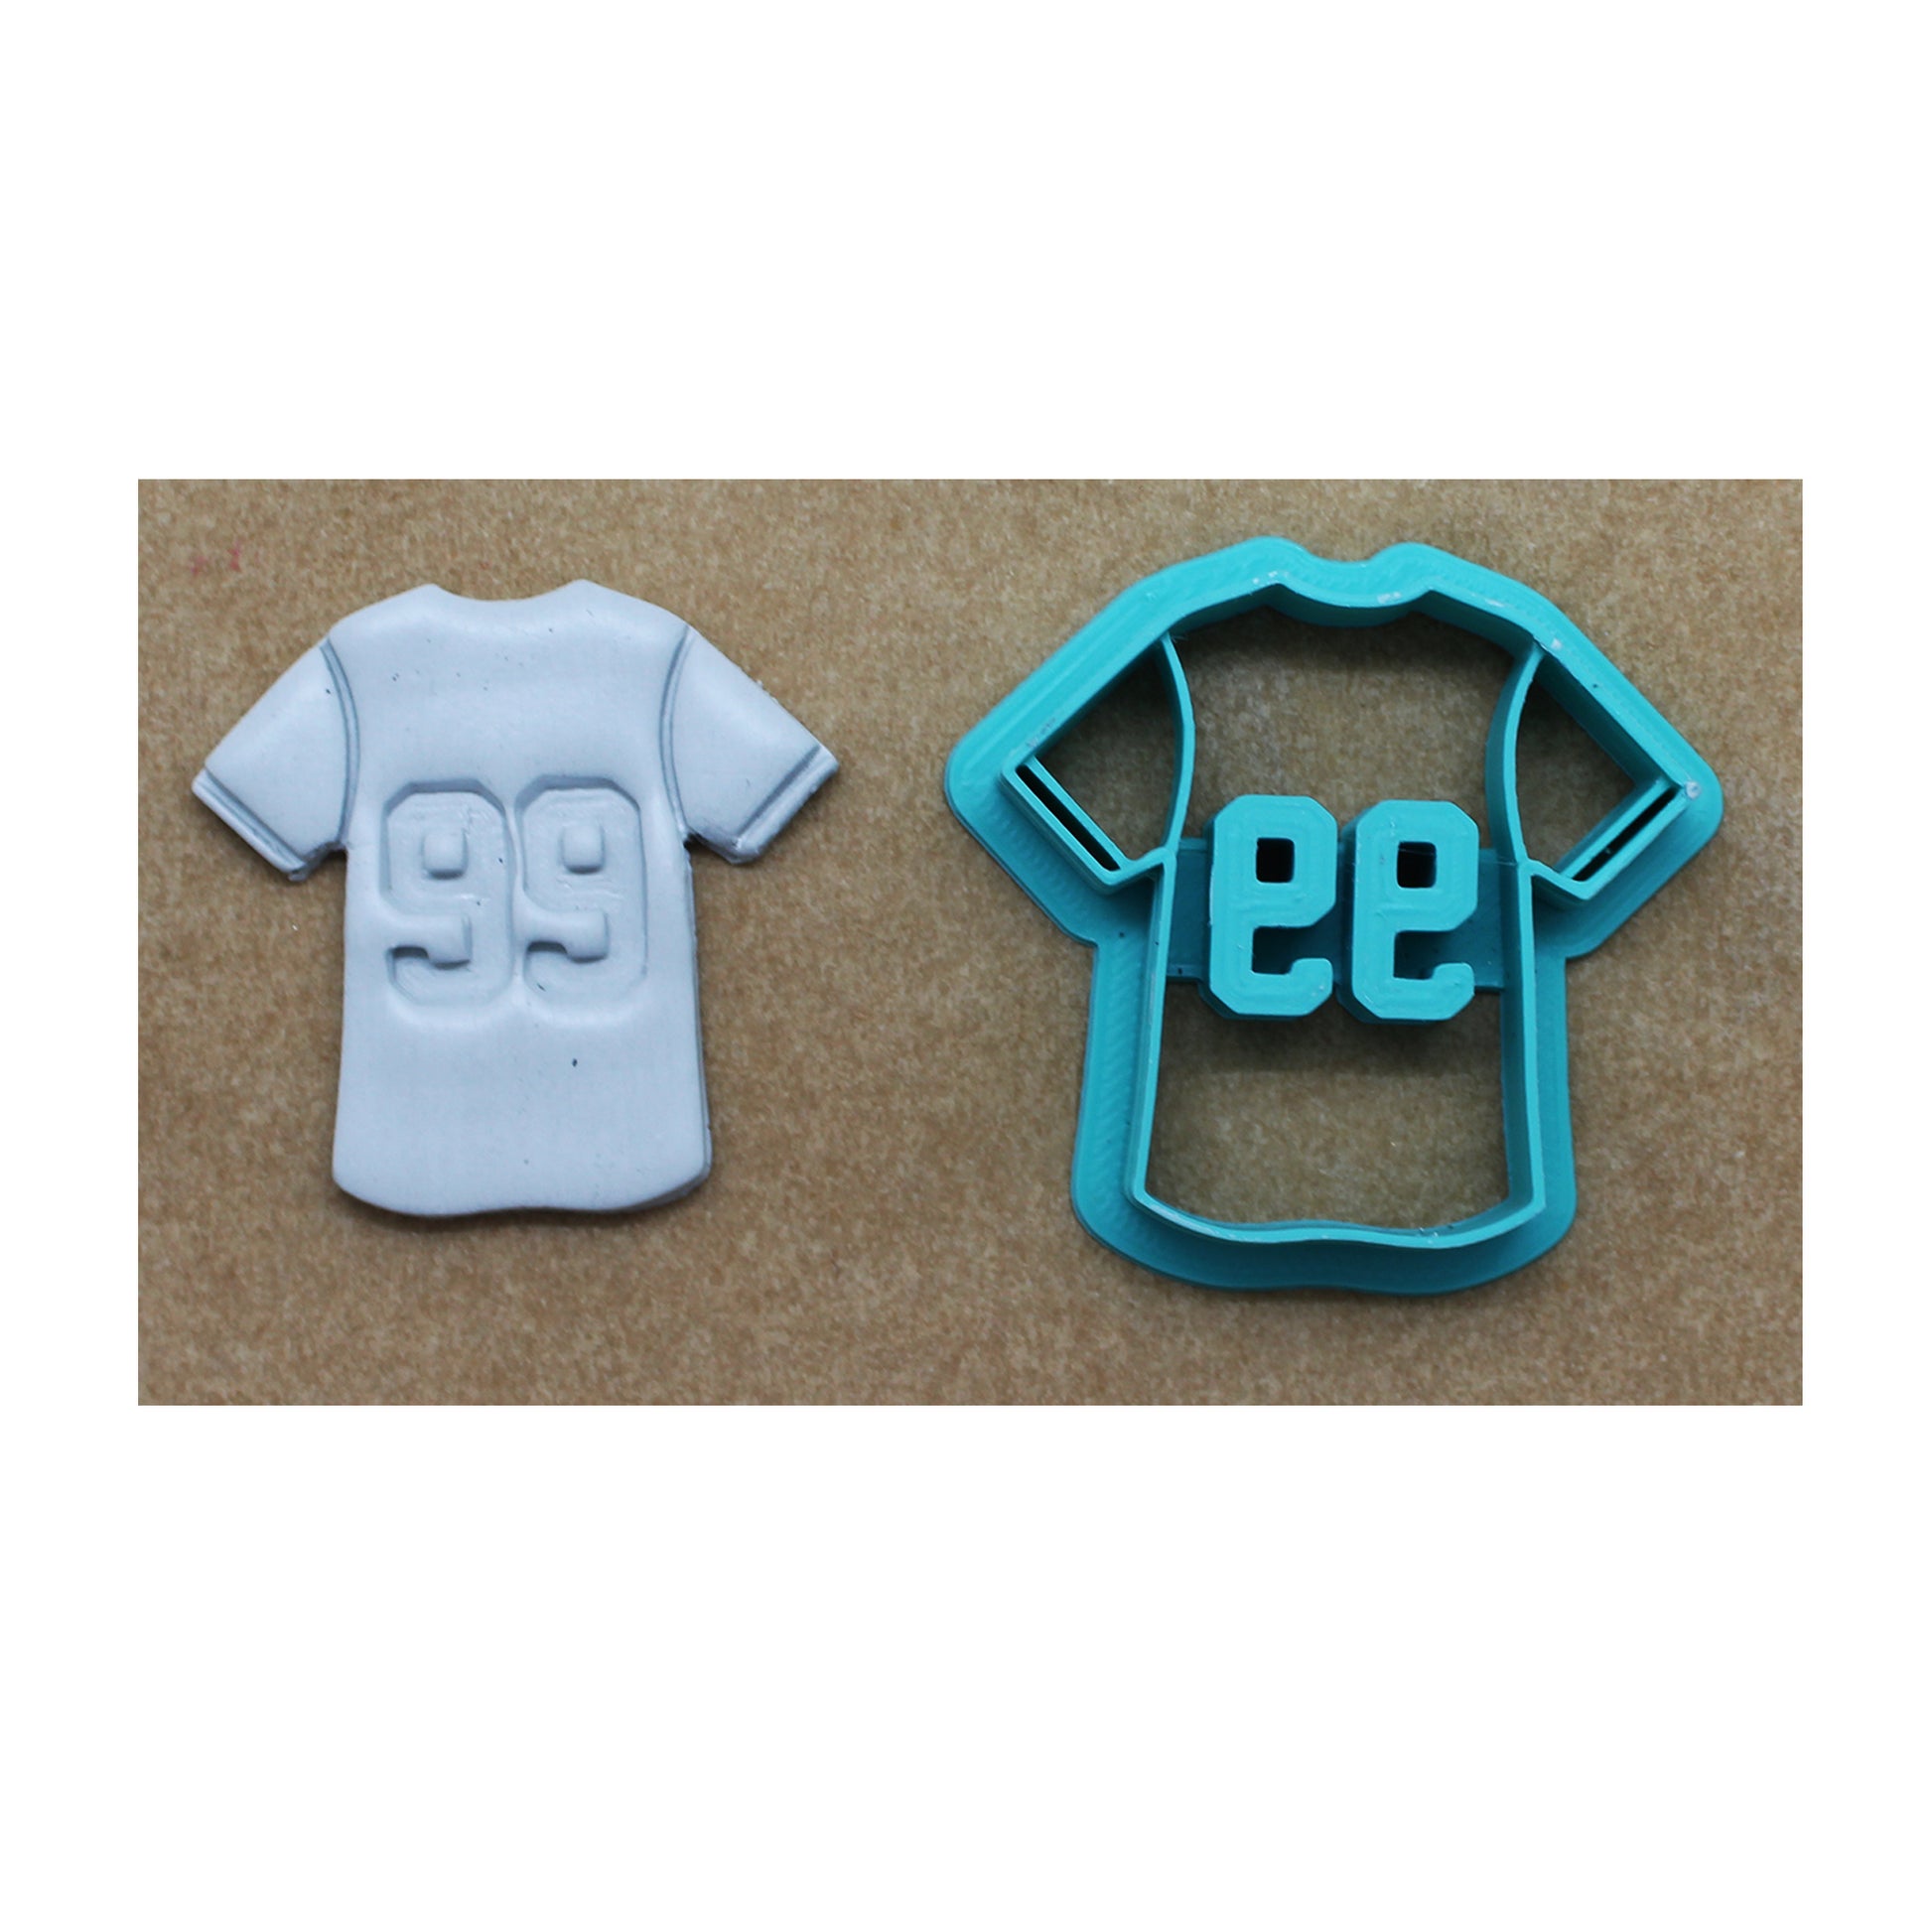 Number 1 Cookie Cutter - Number One Cookie Cutter - Number Cookie Cutters -  Cookie Cutter Numbers - Polymer Clay Cutters - Craft Cutters